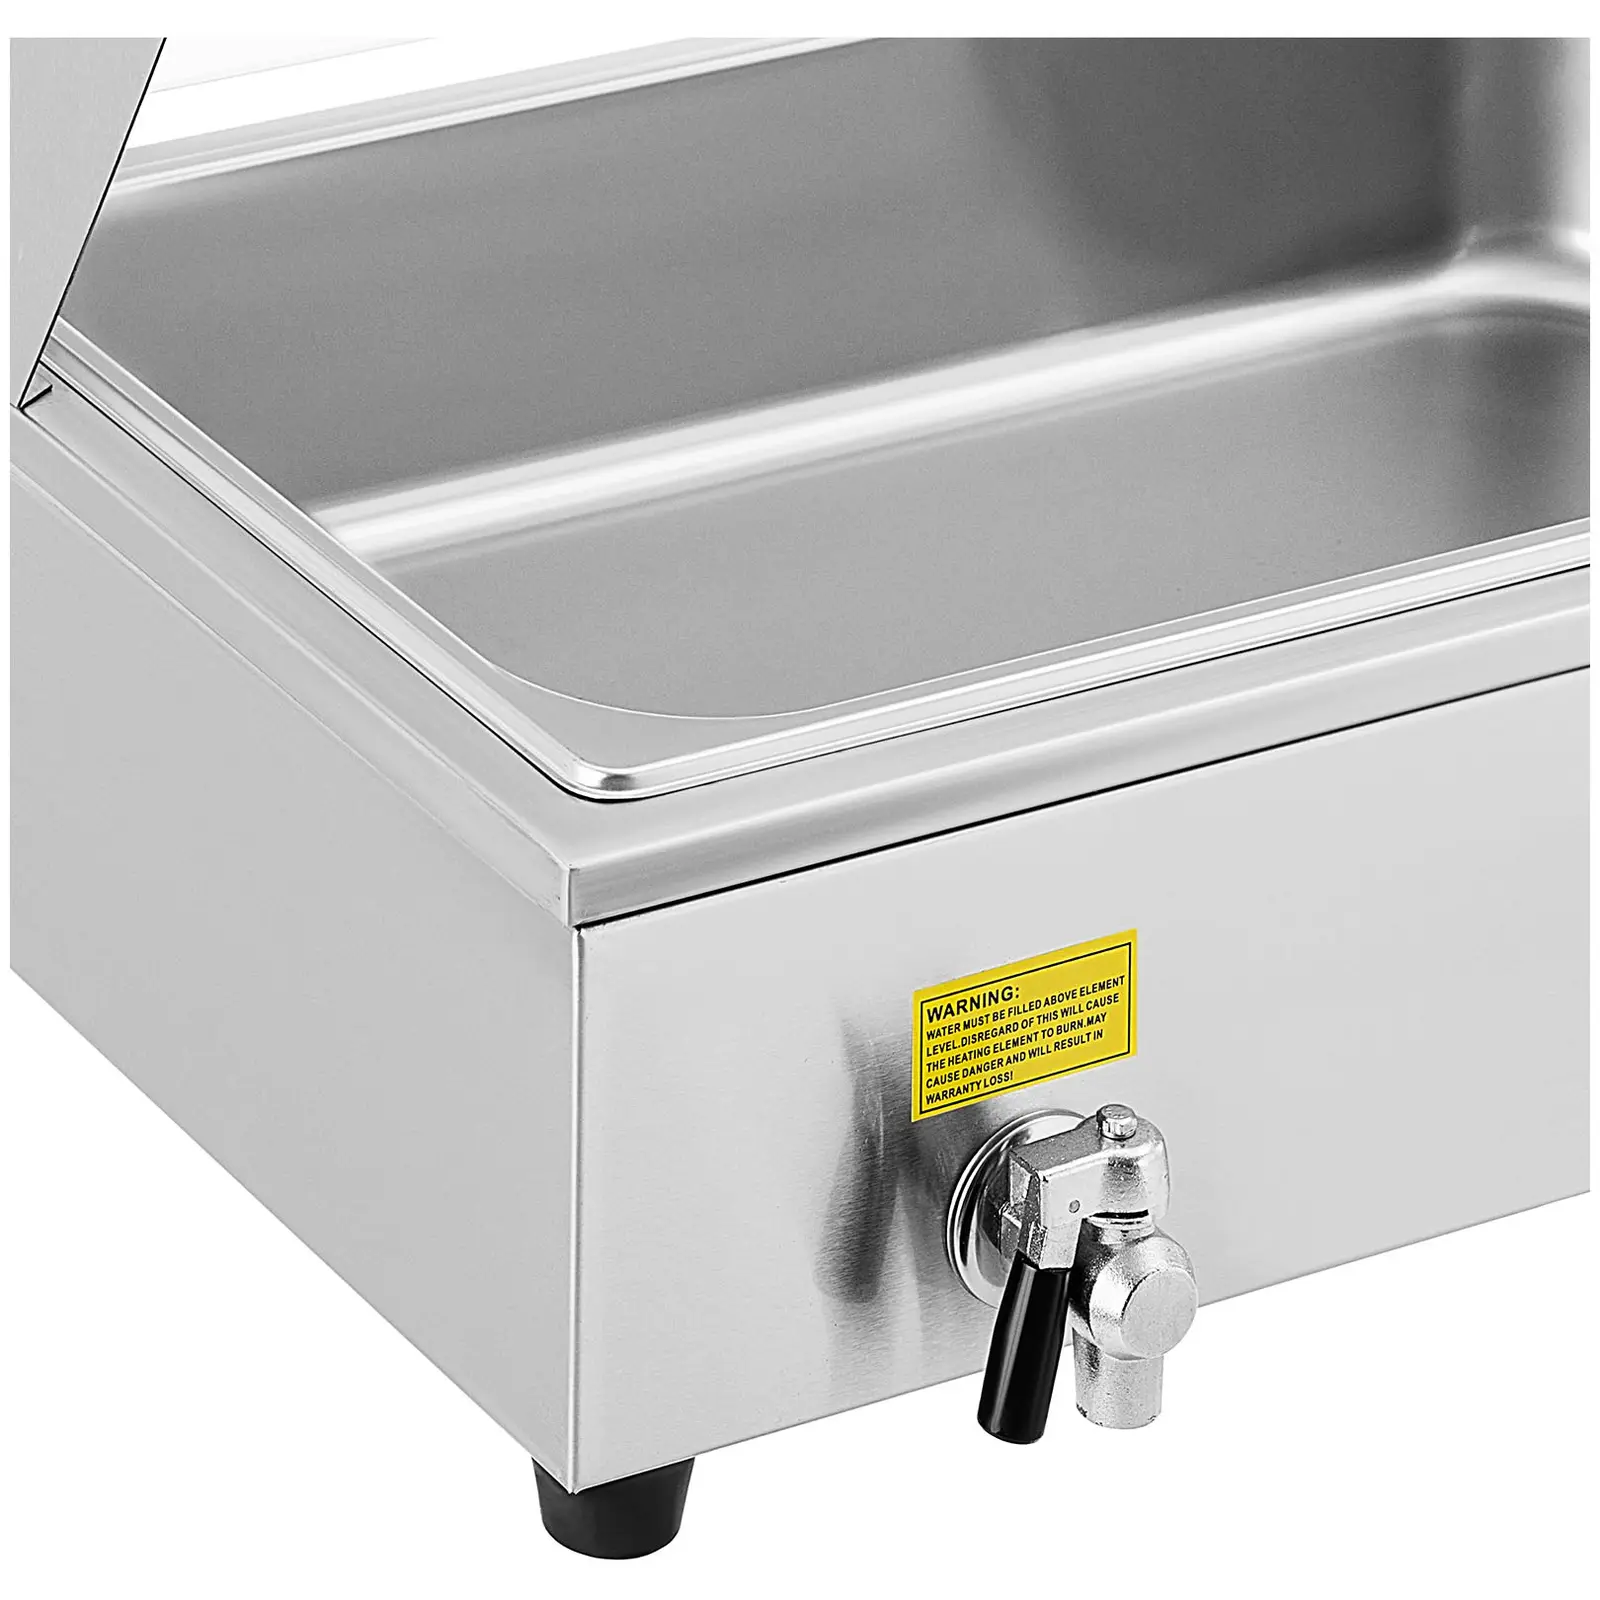 Bain Marie - 6 x GN Behälter - Royal Catering